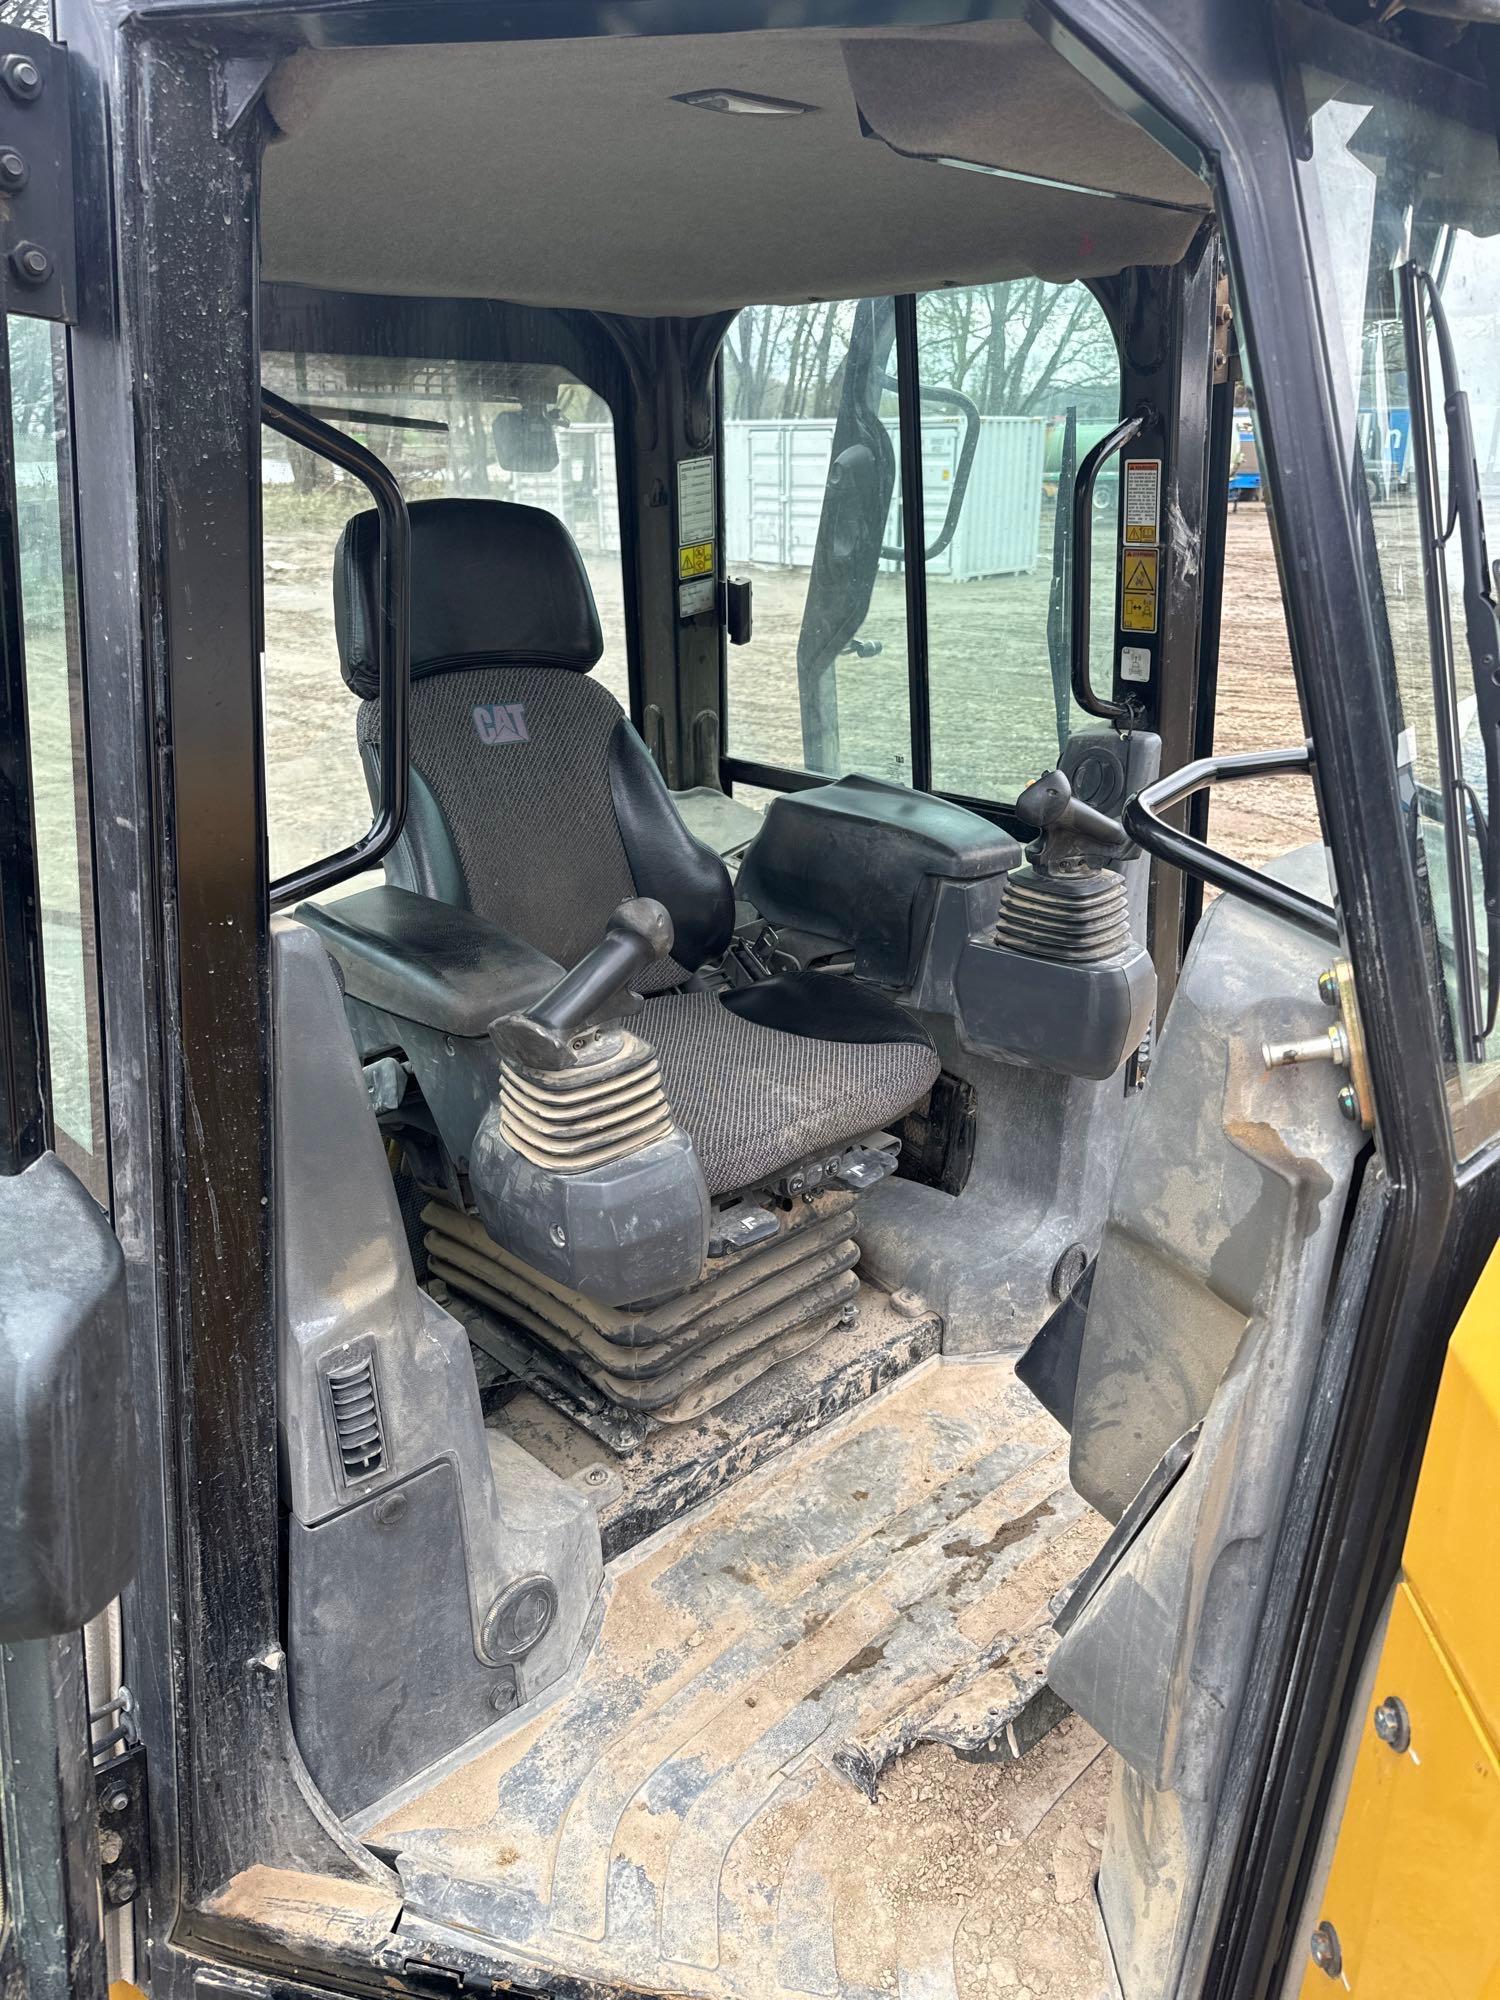 2018 CAT D6K2XL CRAWLER TRACTOR SN::MGM00318 powered by Cat diesel engine, equipped with EROPS, air,